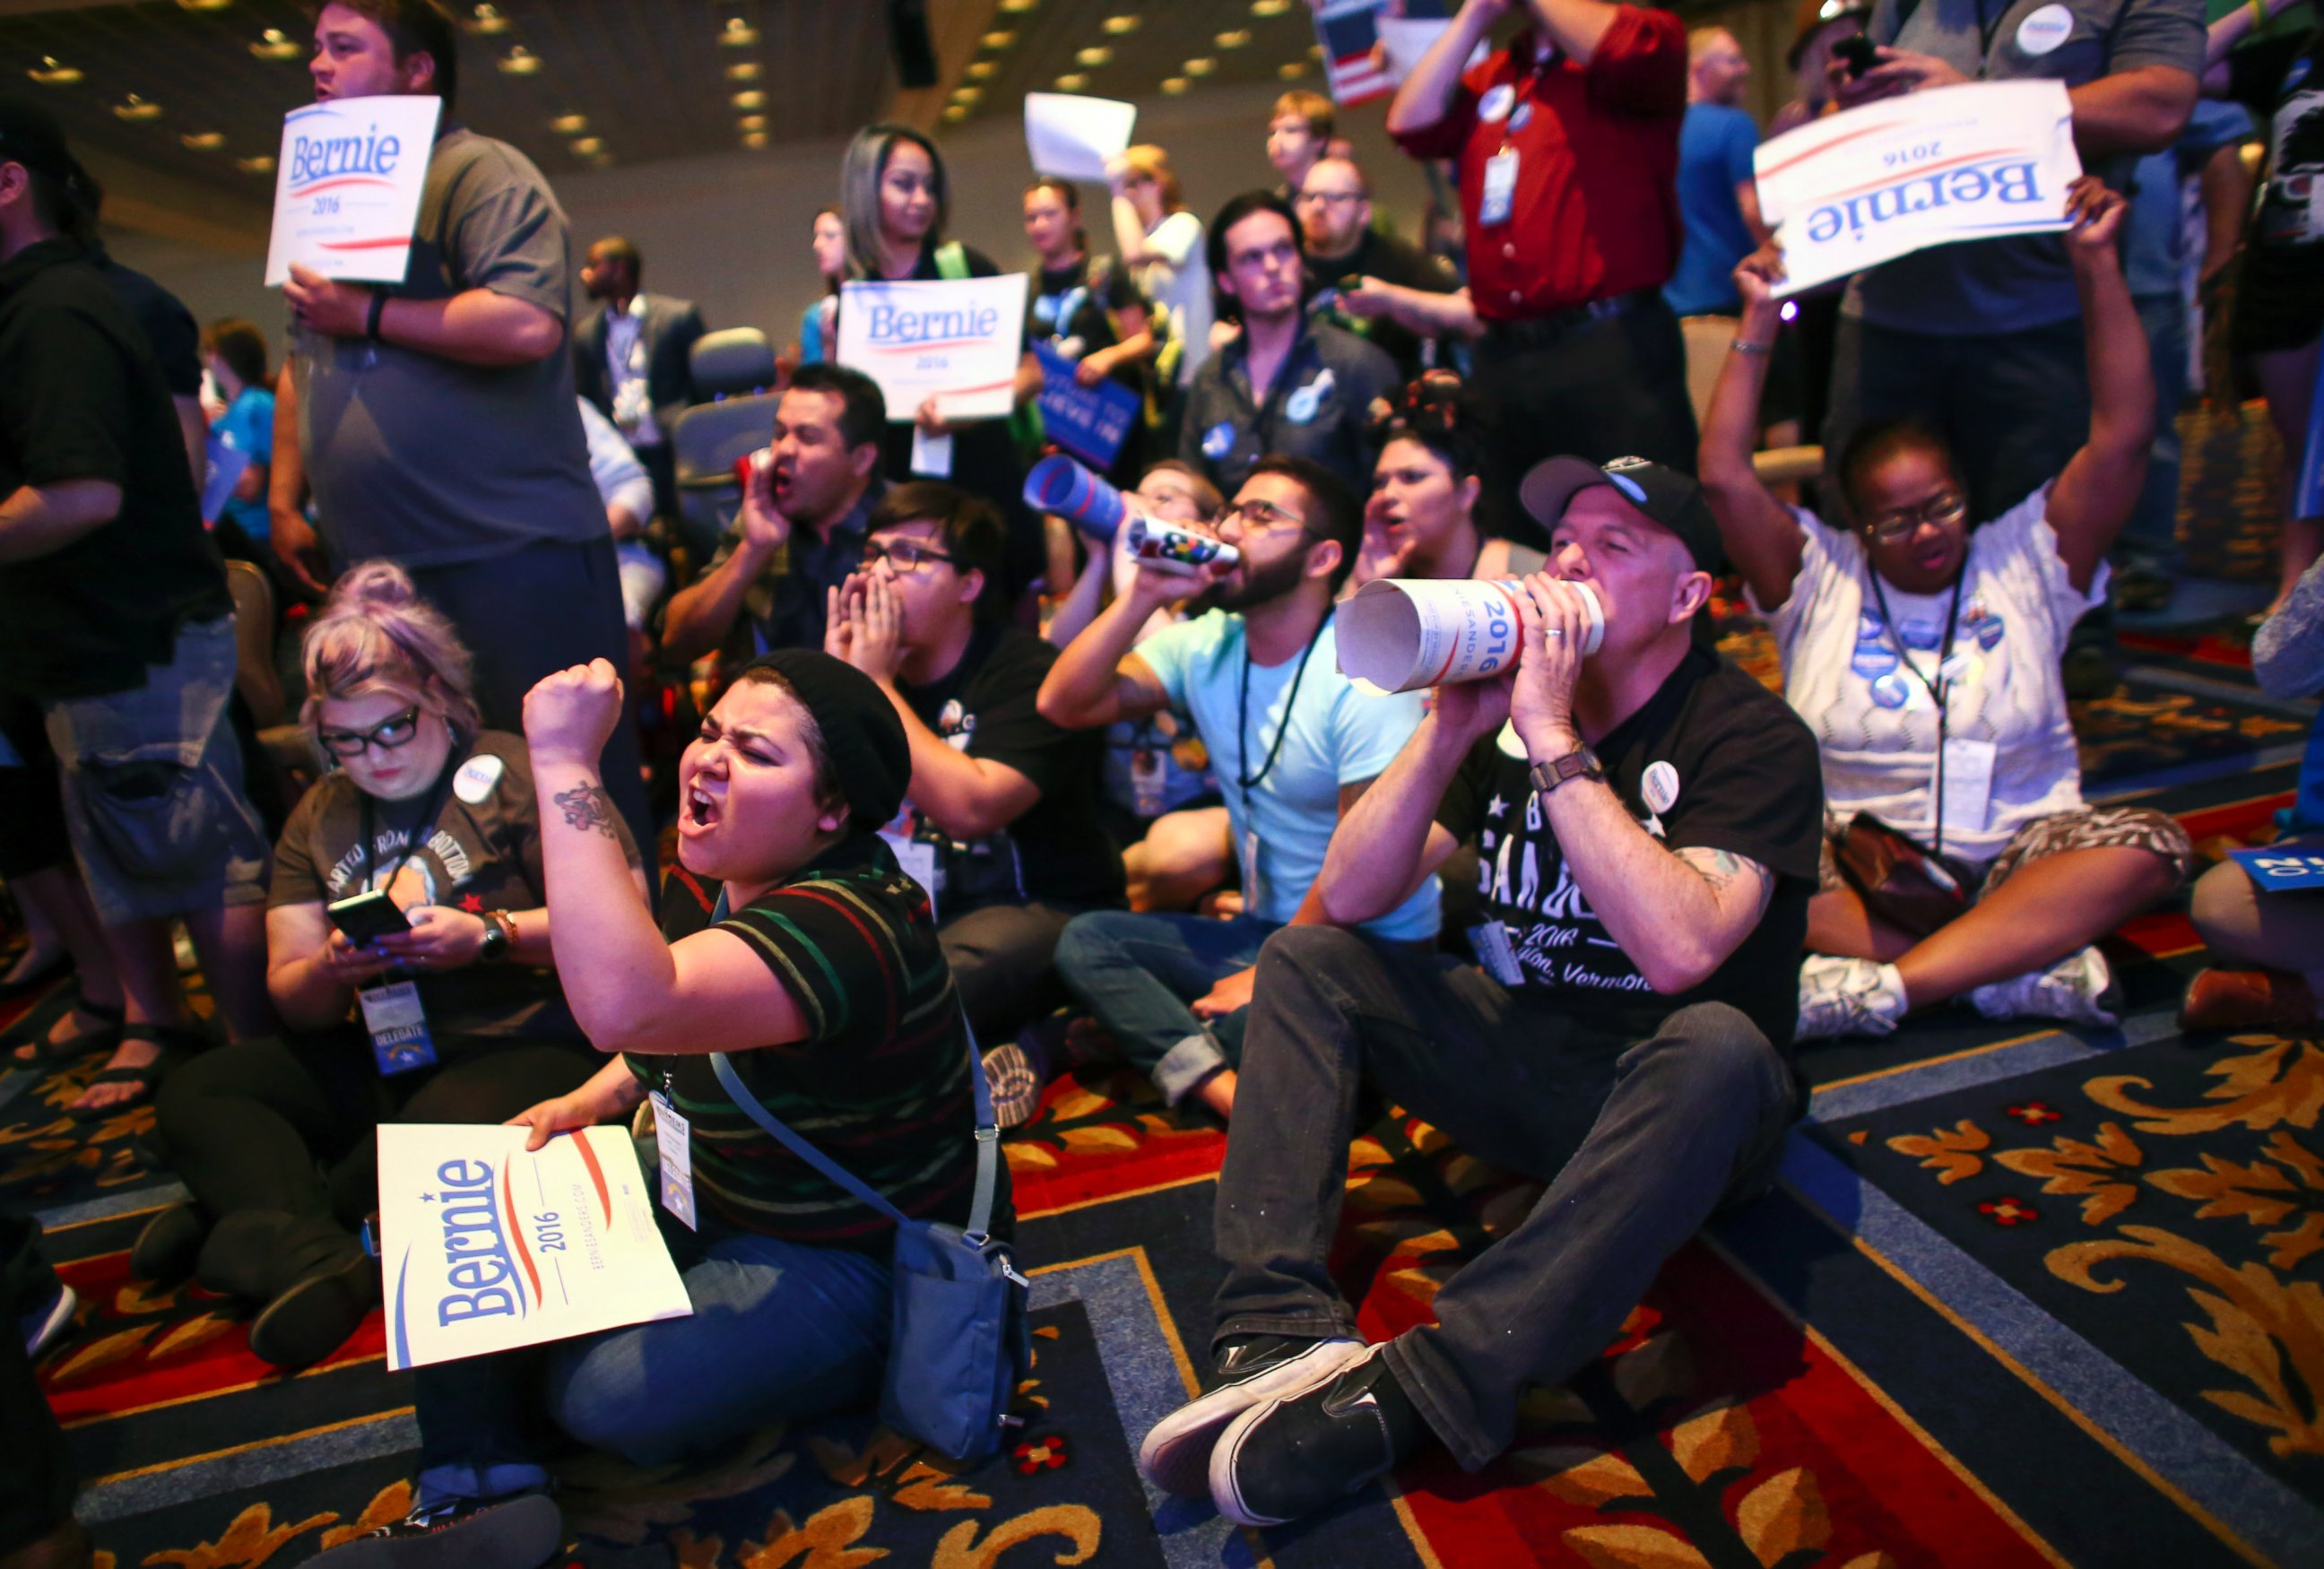 PHOTO: Supporters of Democratic presidential candidate Bernie Sanders, including Valeria Romano, center left, and Johnny Hancen, center right, gather in the front of the room during the Nevada State Democratic Party, May 14, 2016.